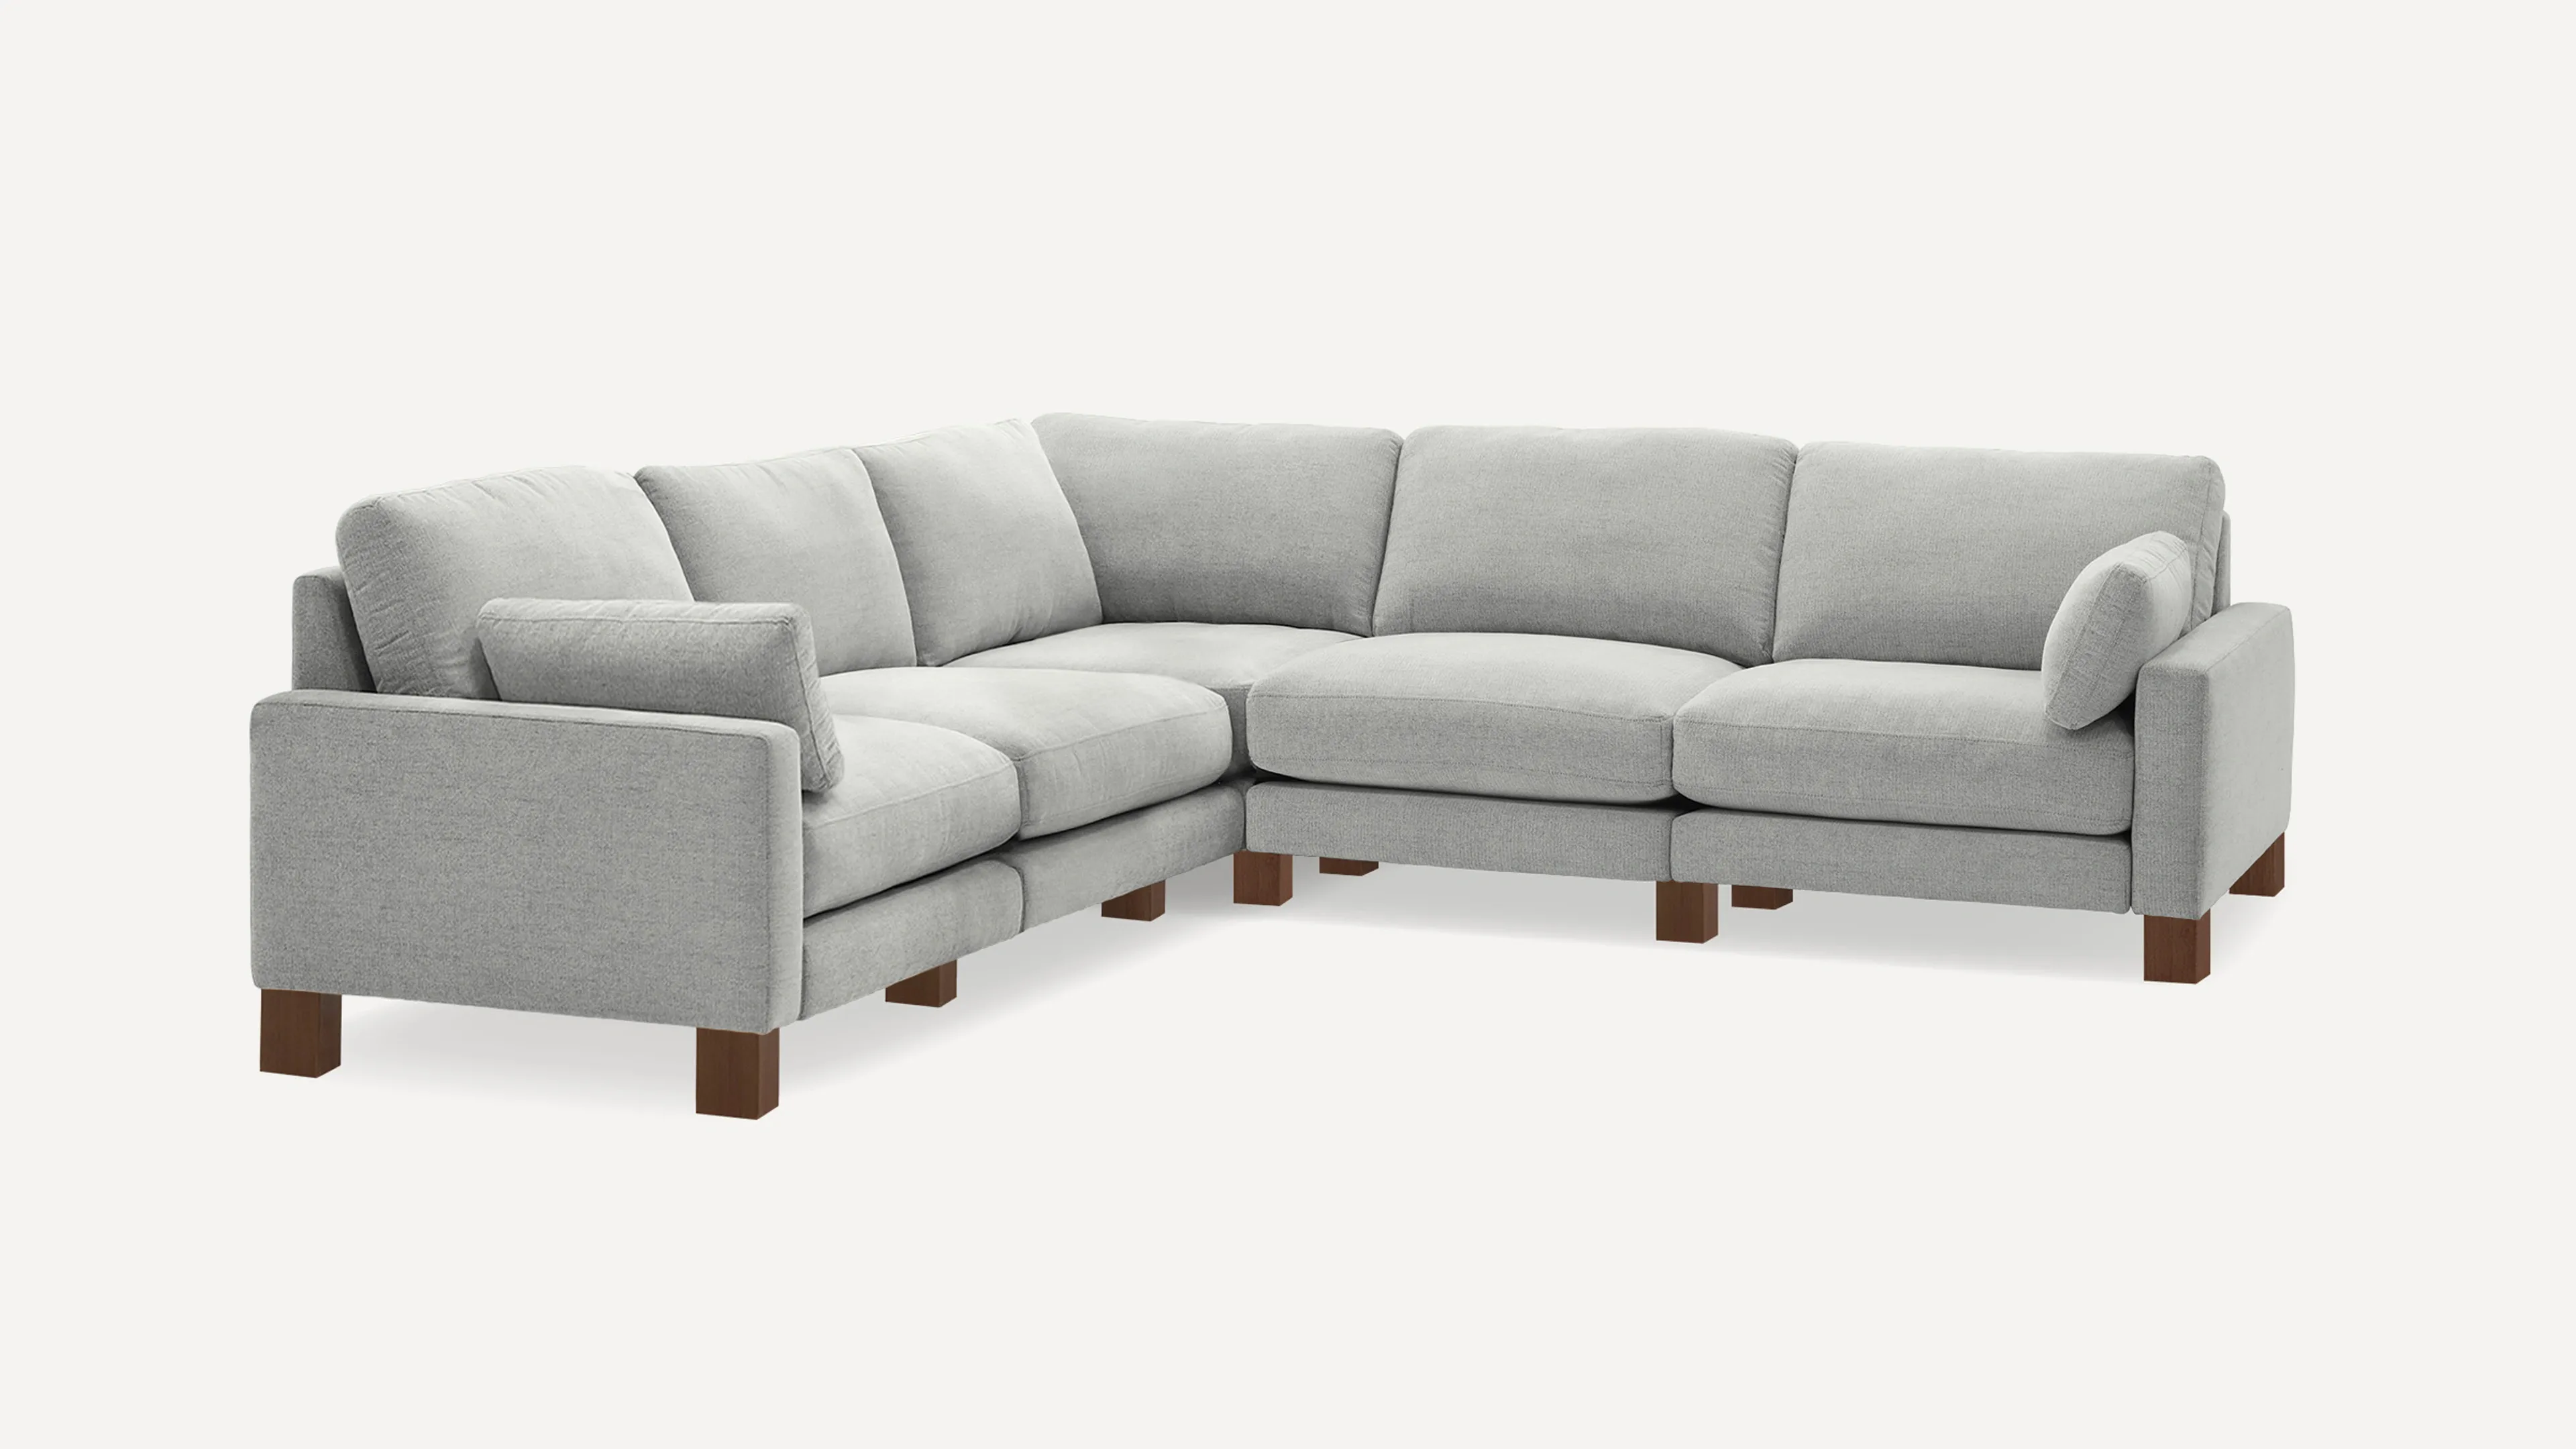 Union 5-Seat Sectional